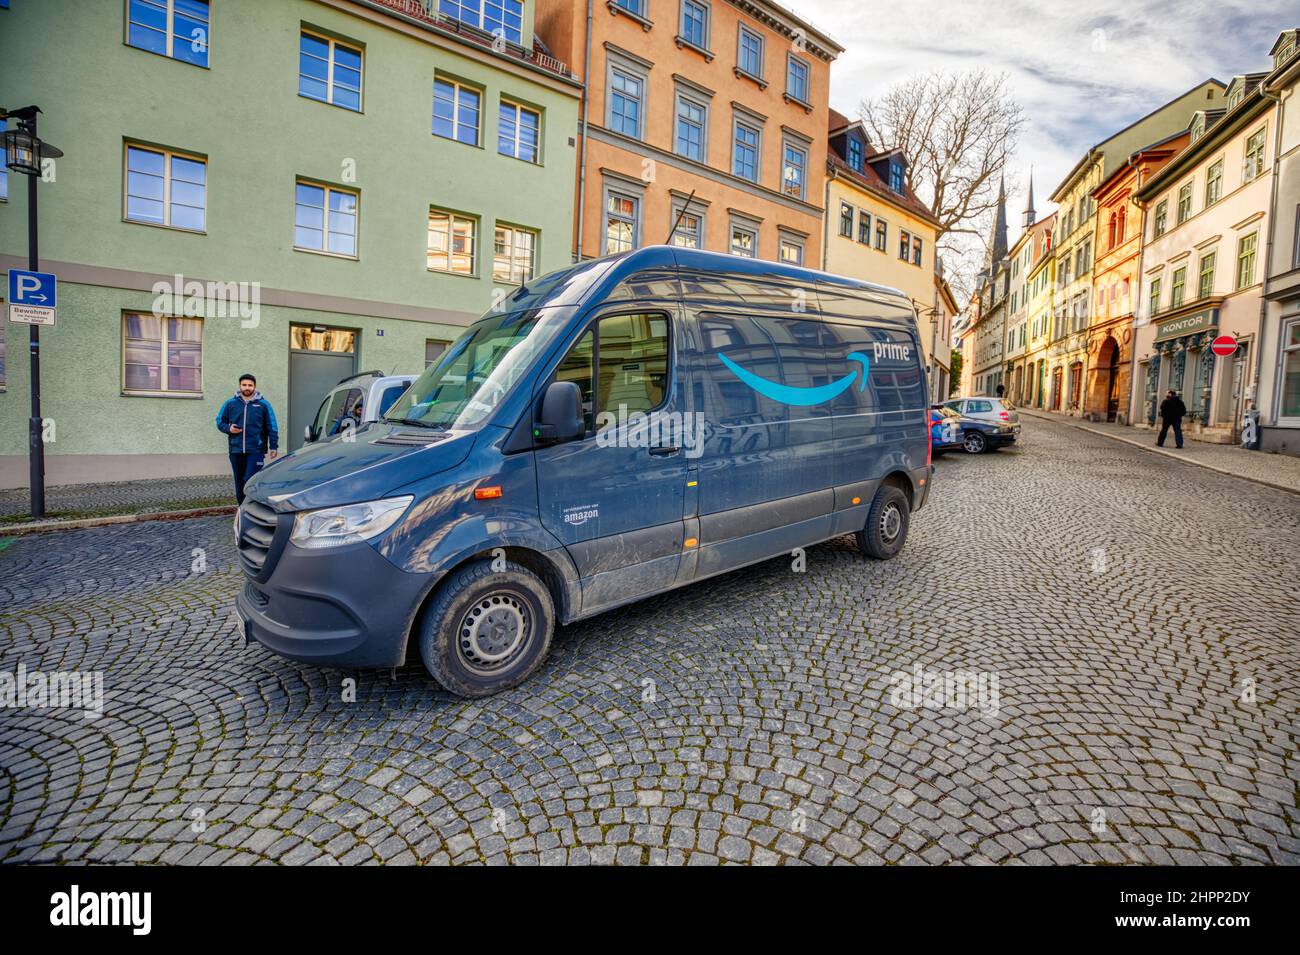 Weimar, Germany - February 21, 2022: Mercedes Sprinter van from Amazon Prime stands in a pedestrian area to load packages Stock Photo